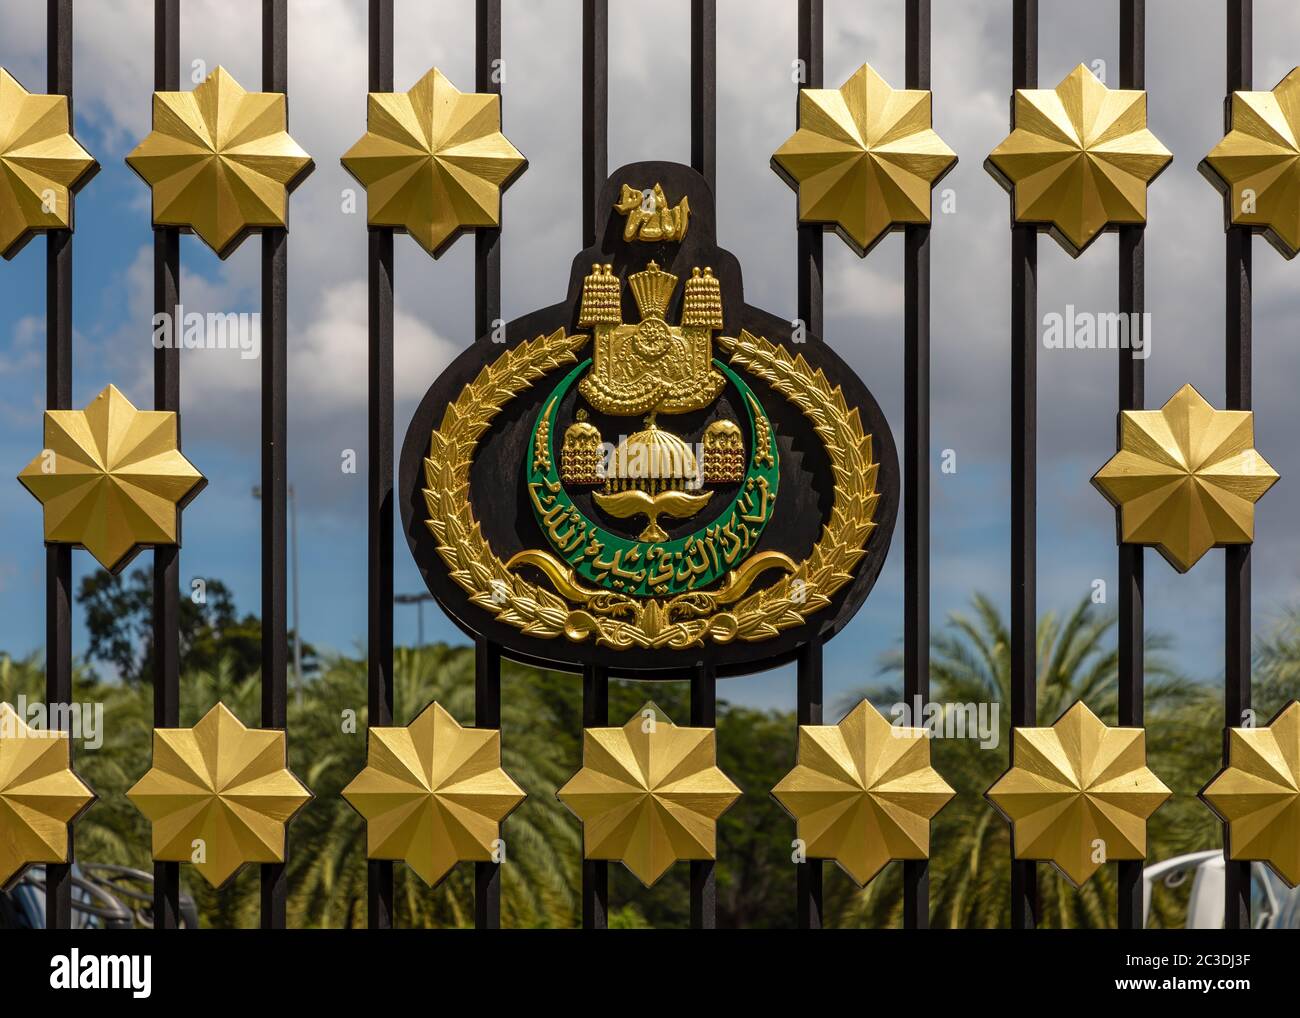 Closeup of the access gate to Jame' Asr Hassanil Bolkiah Mosque for His Royal Highness, Ministers and VIP in Bandar Seri Begawan, Brunei Stock Photo